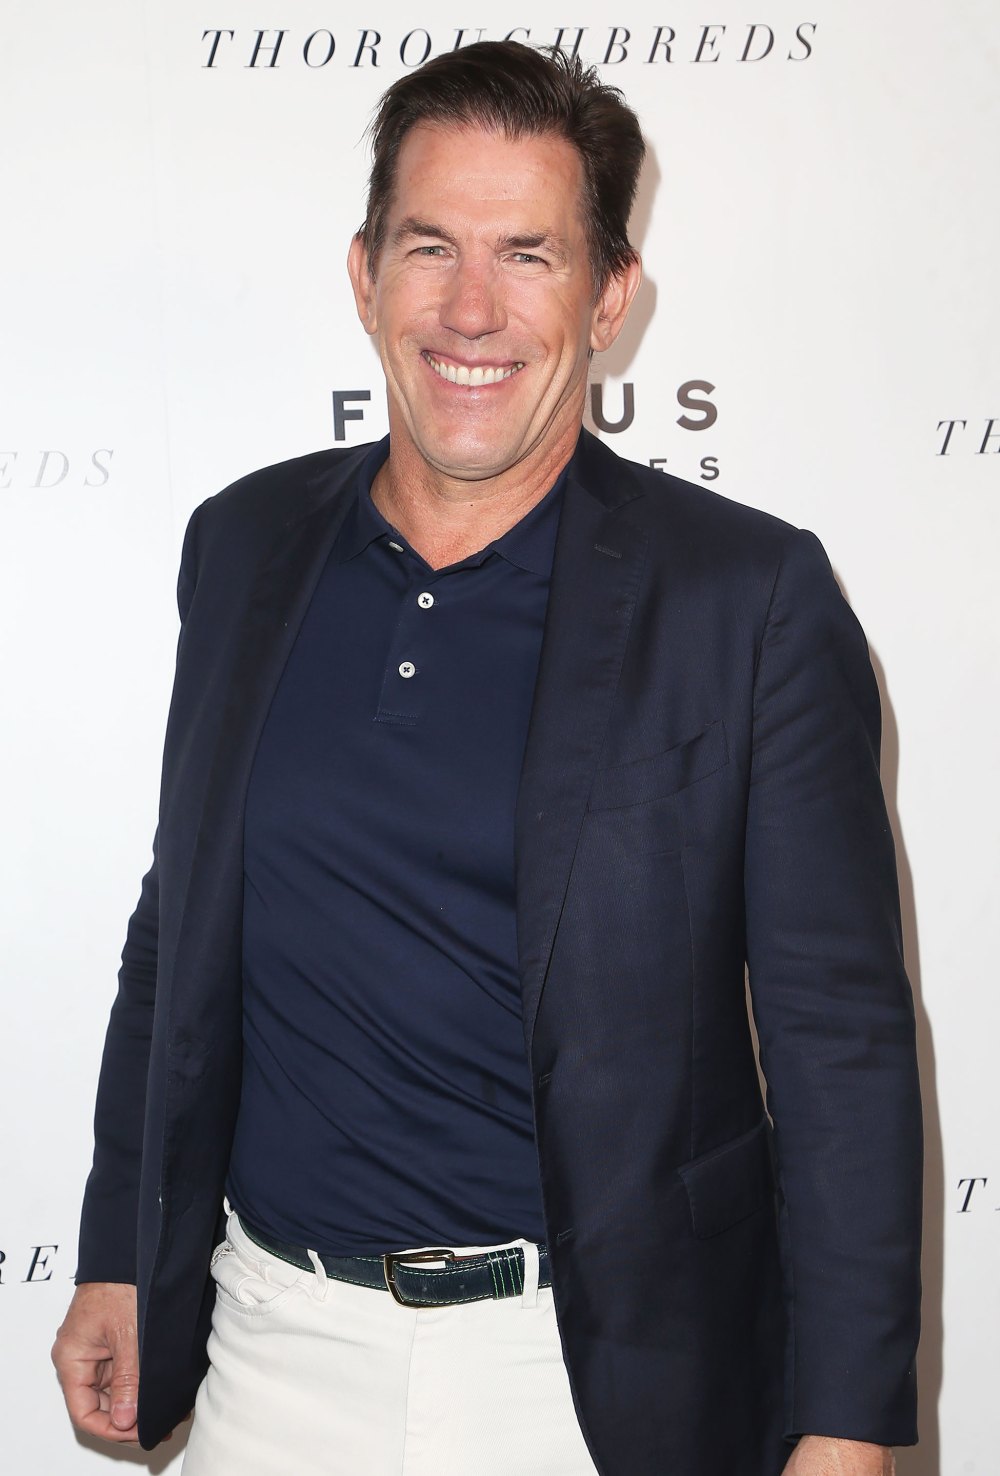 Southern Charm’s Thomas Ravenel Welcomes 3rd Child, His 1st With Heather Mascoe